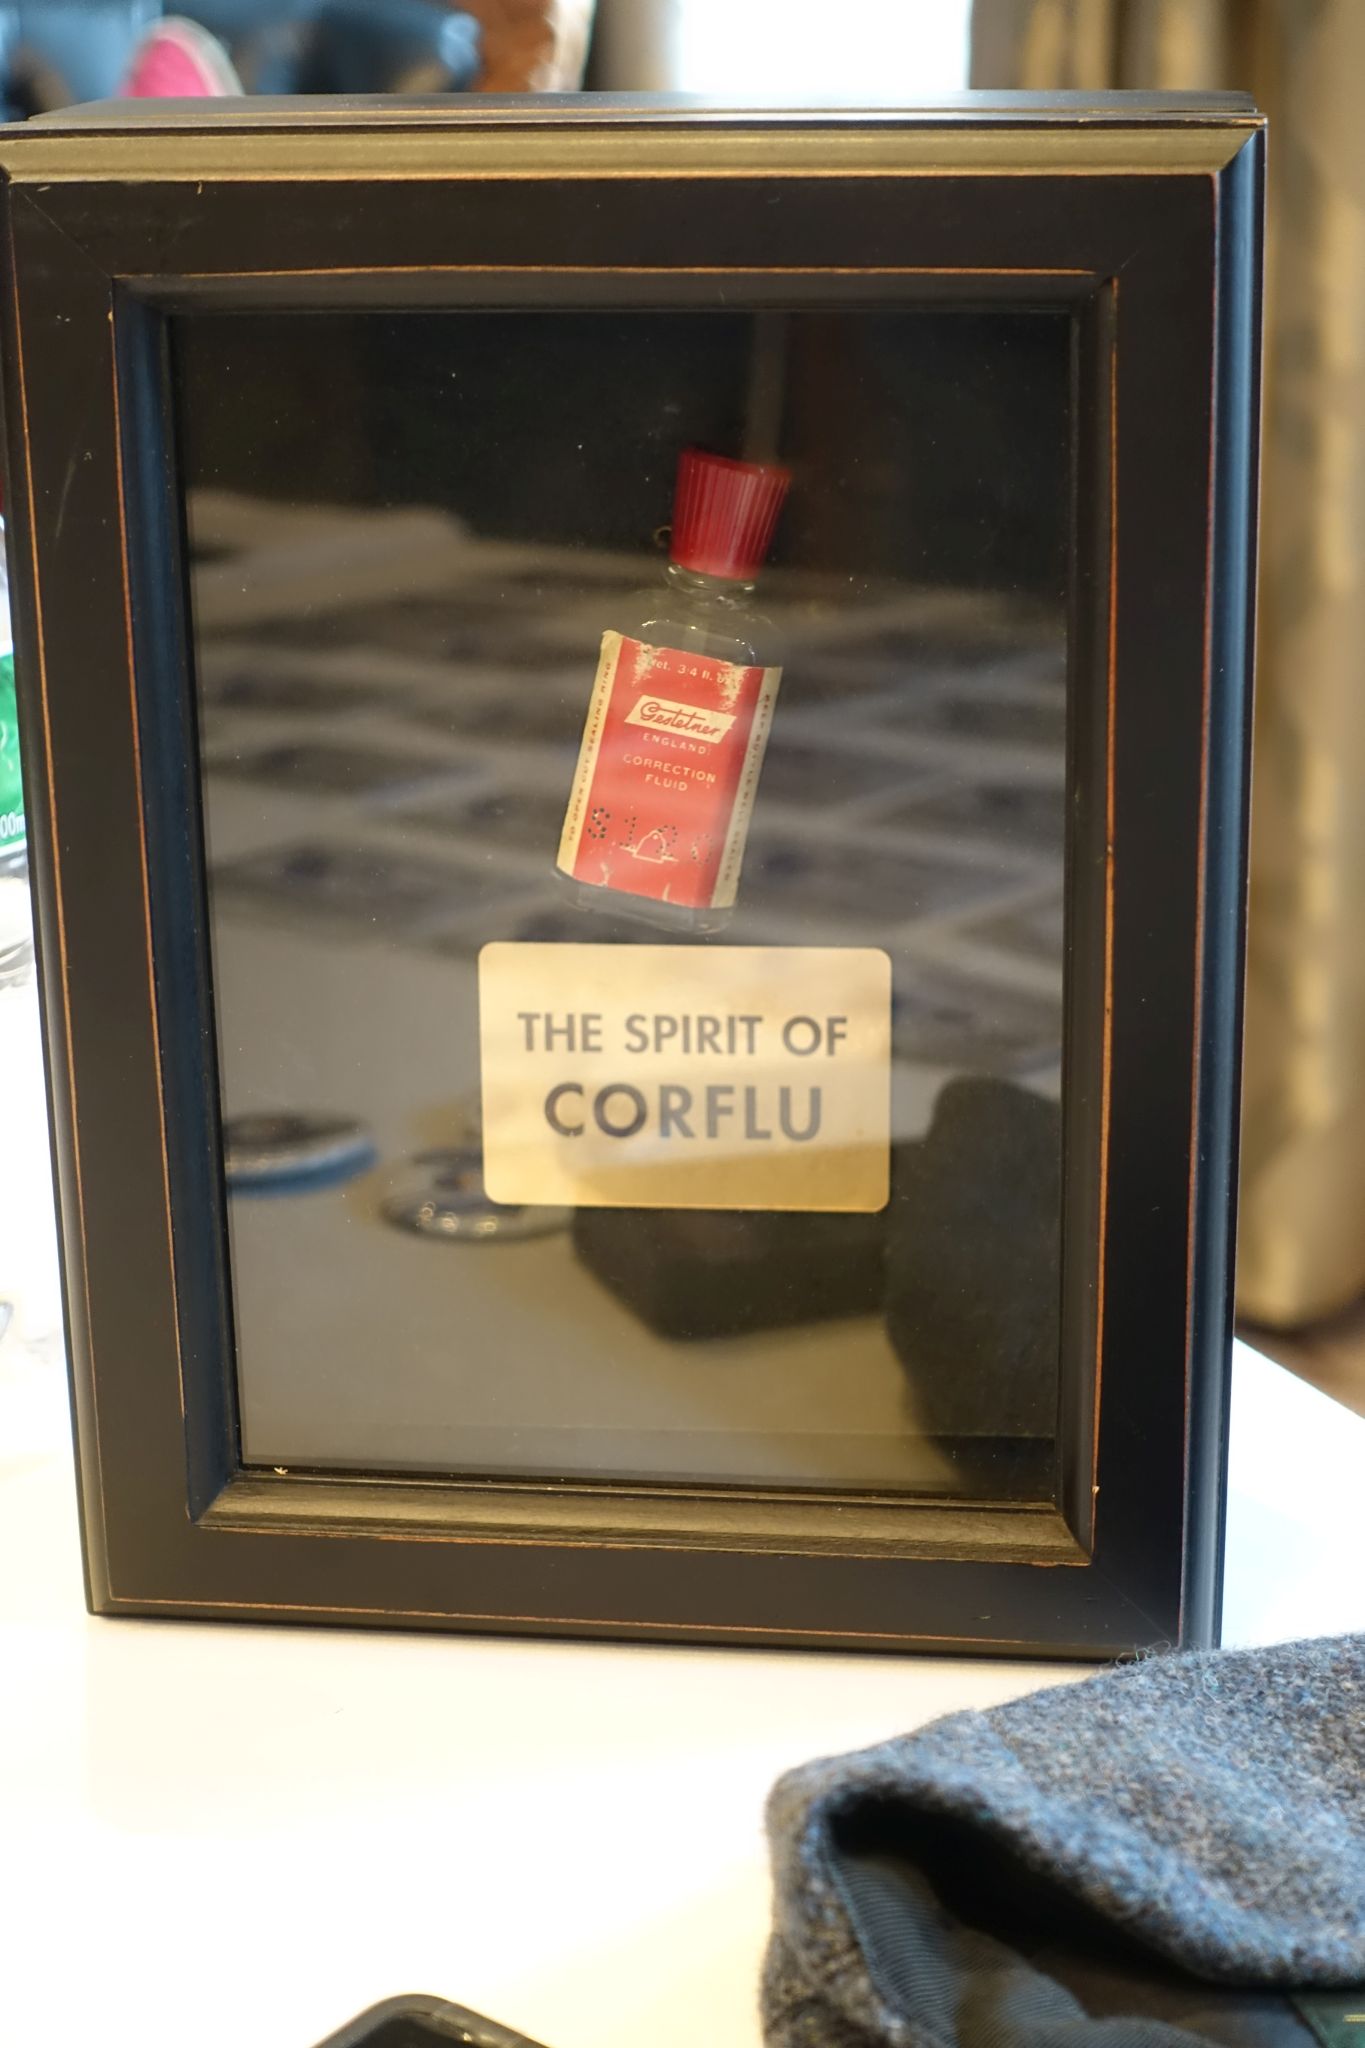 A bottle of Correction Fluid placed in the frame. There is a plaque below that reads 'The Spirit of Corflu'.